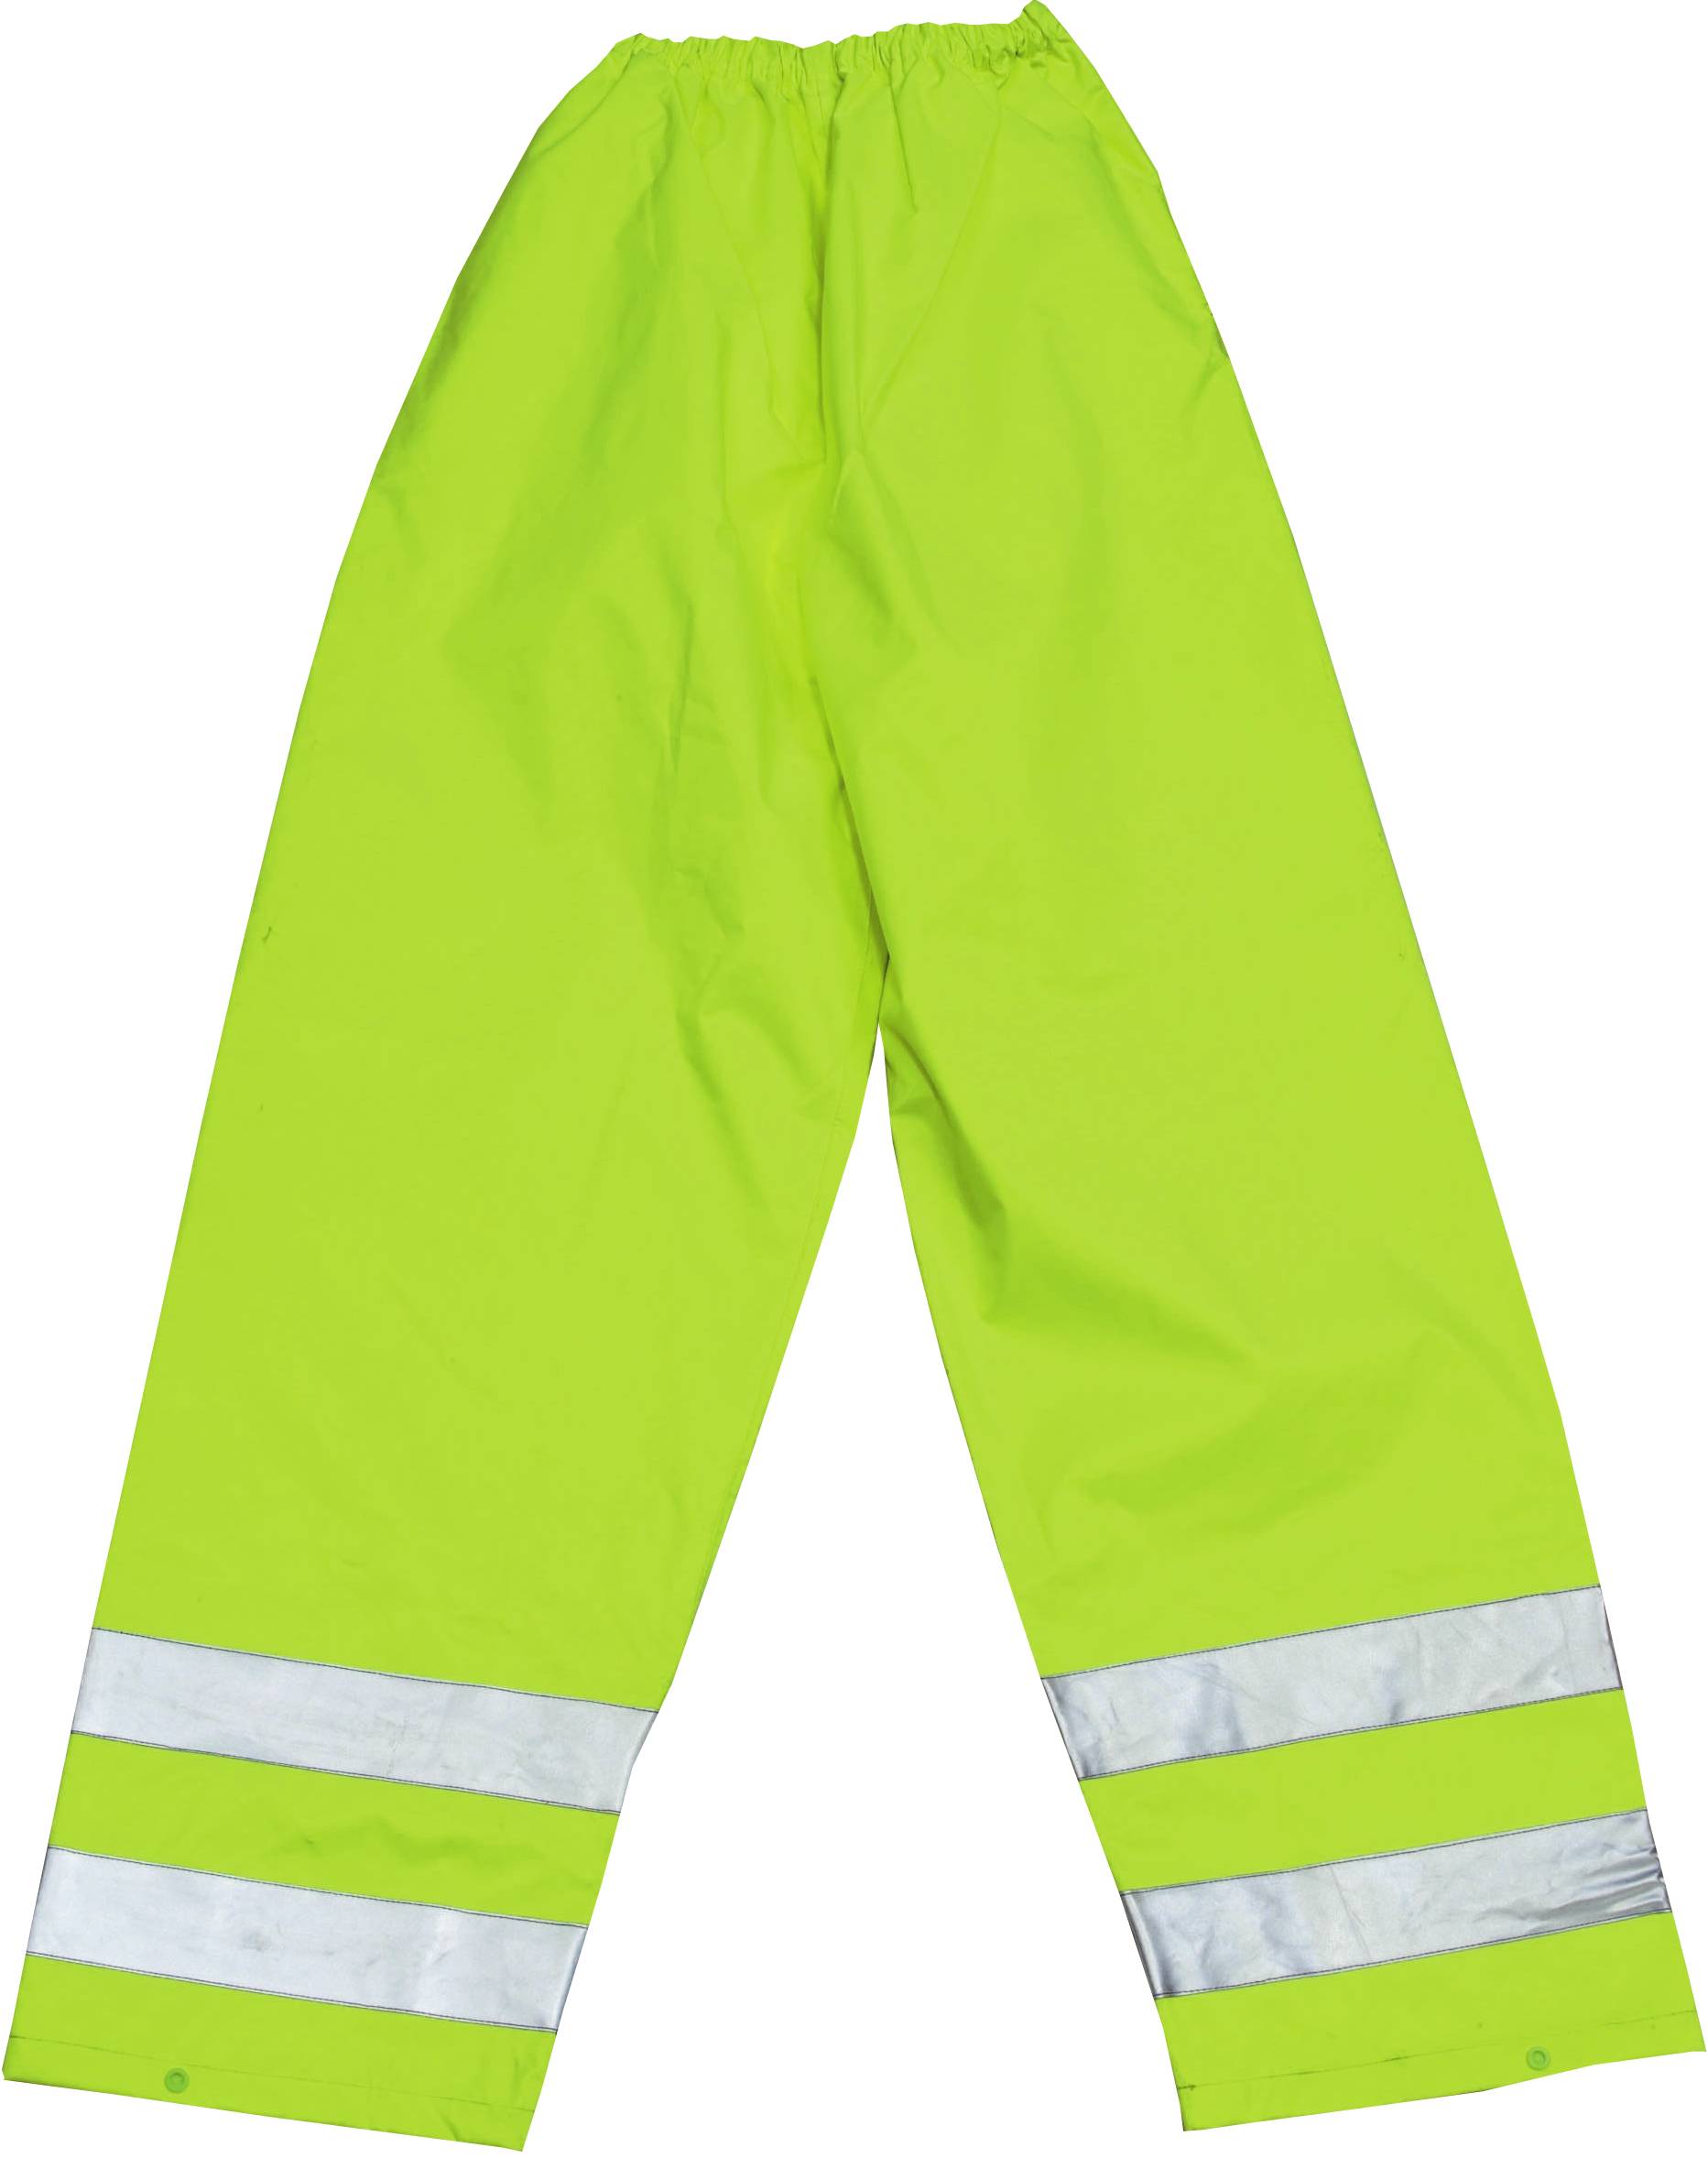 Hi-Vis Yellow Overtrousers to EN471 Class 1